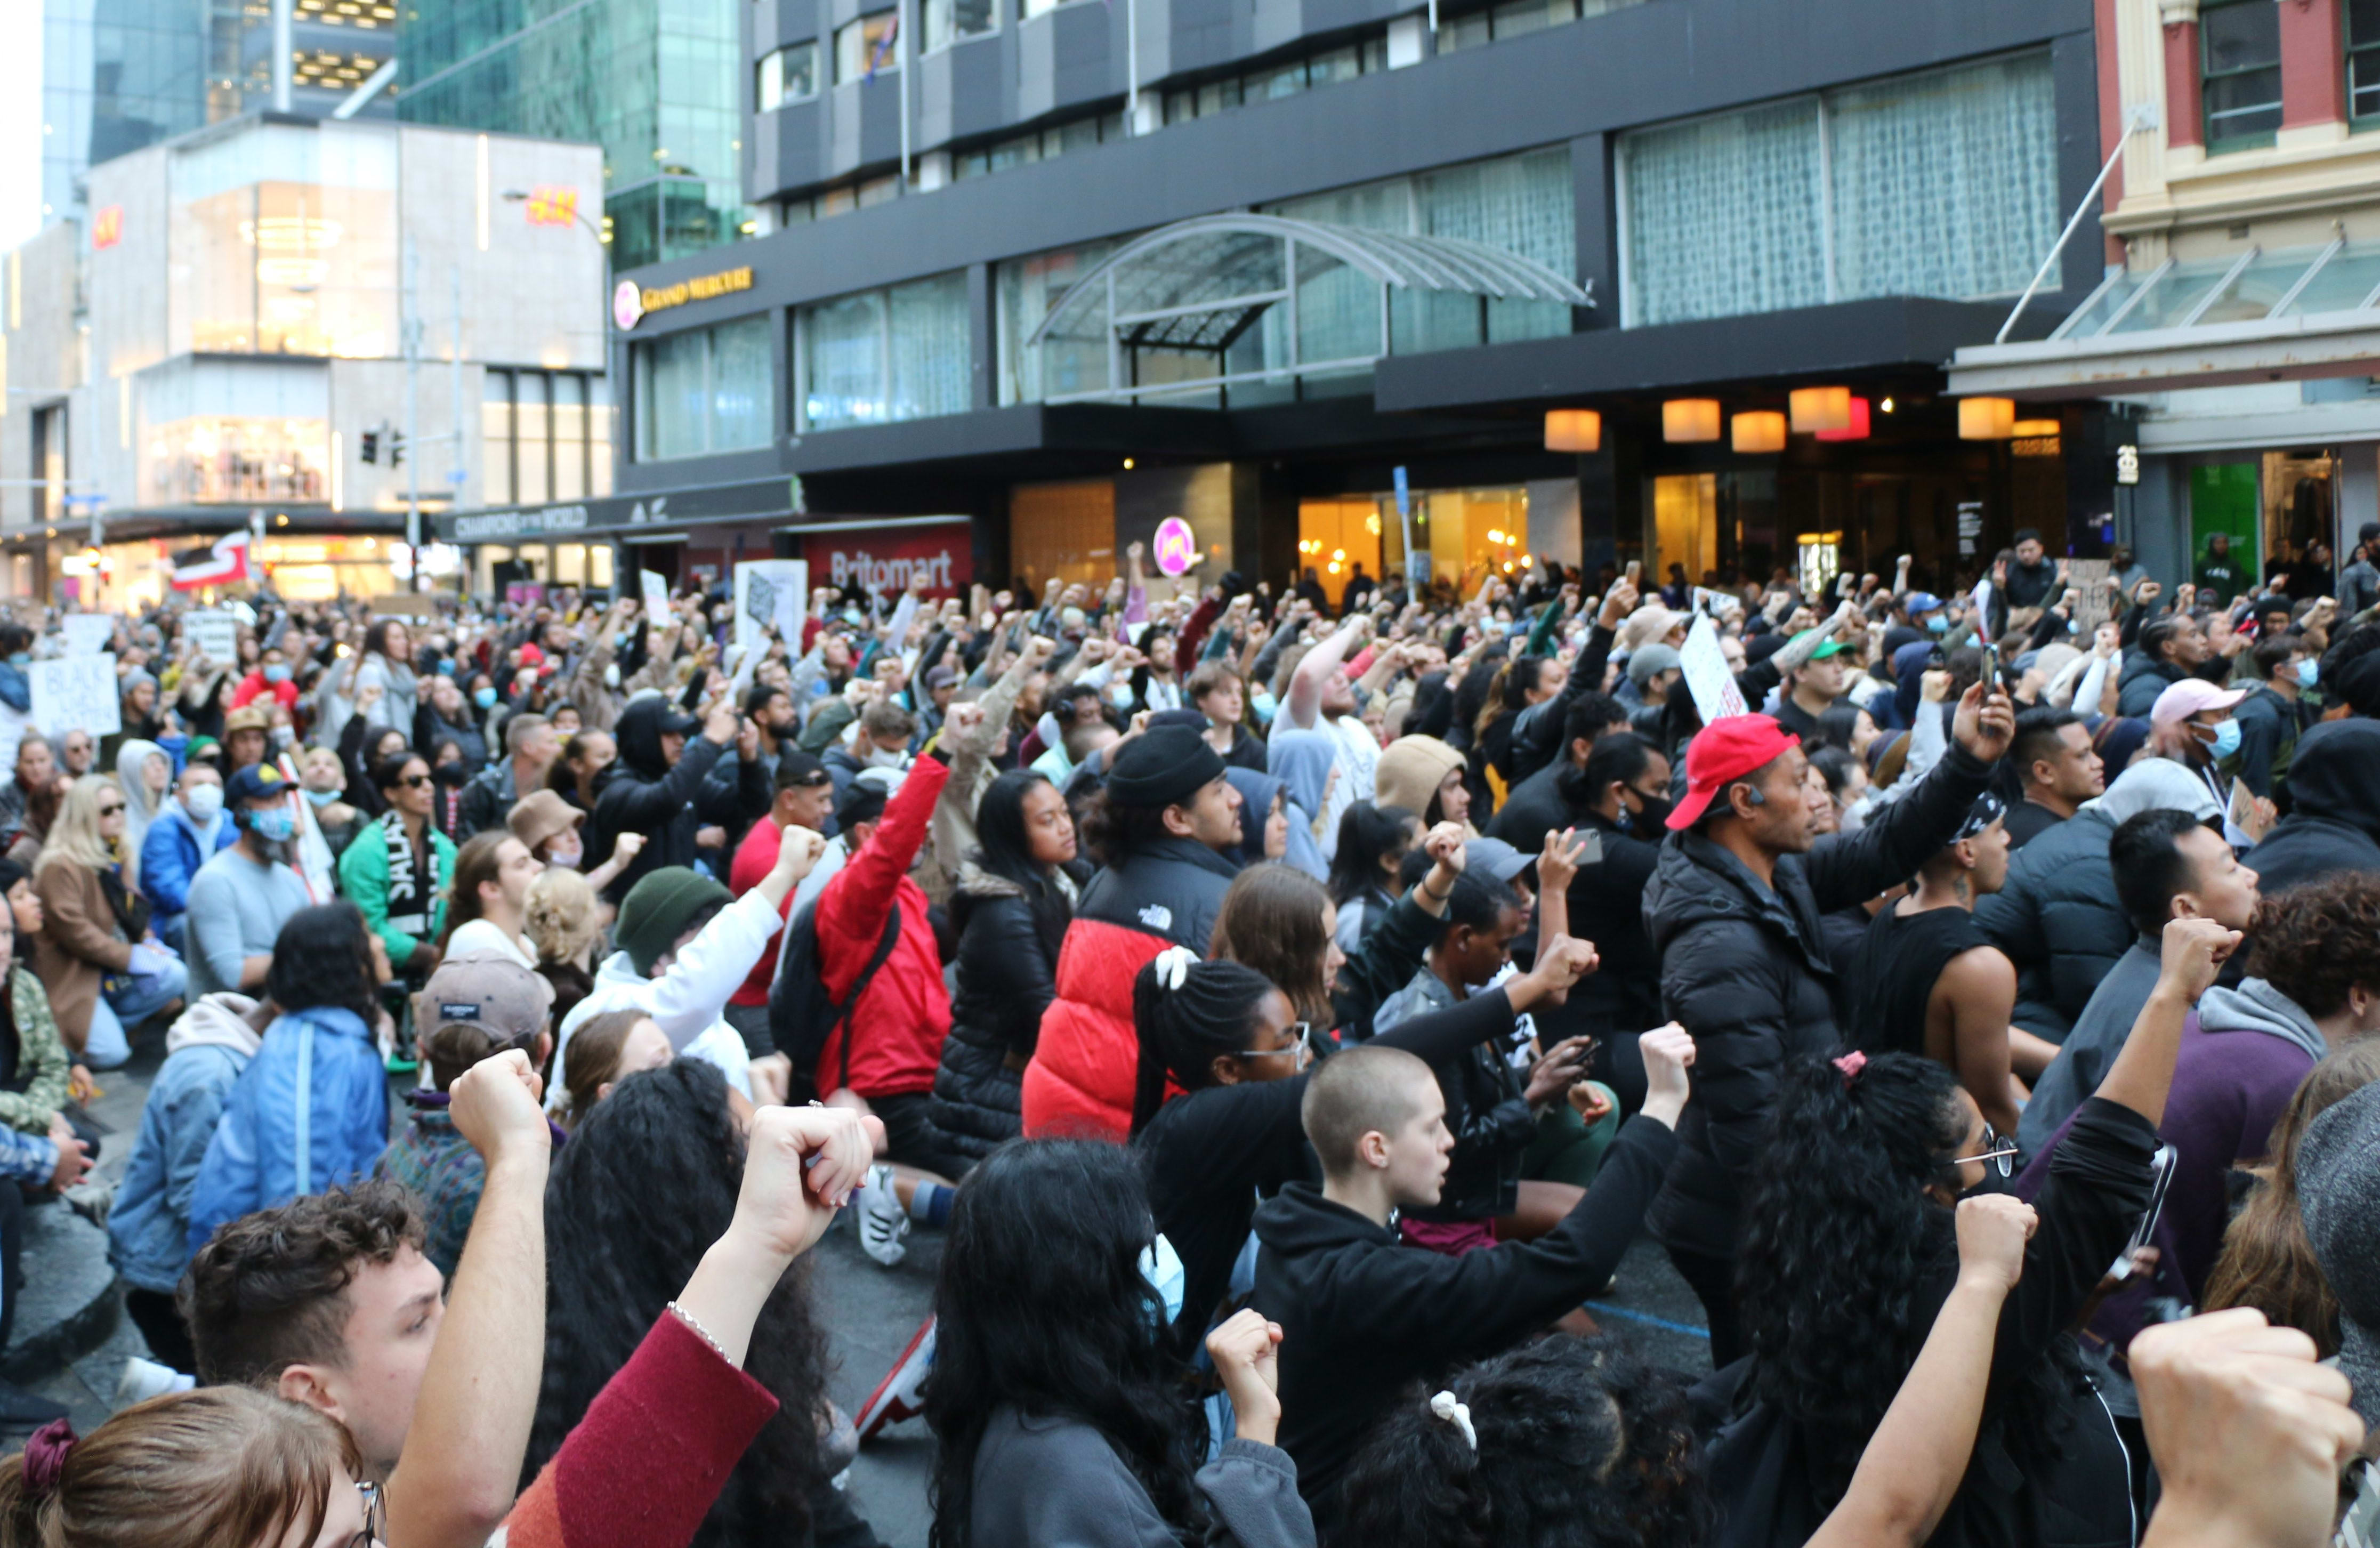 Protesters took a knee with fists up outside the US embassy building in Auckland on 1 June, 2020, chanting "Black lives matter".